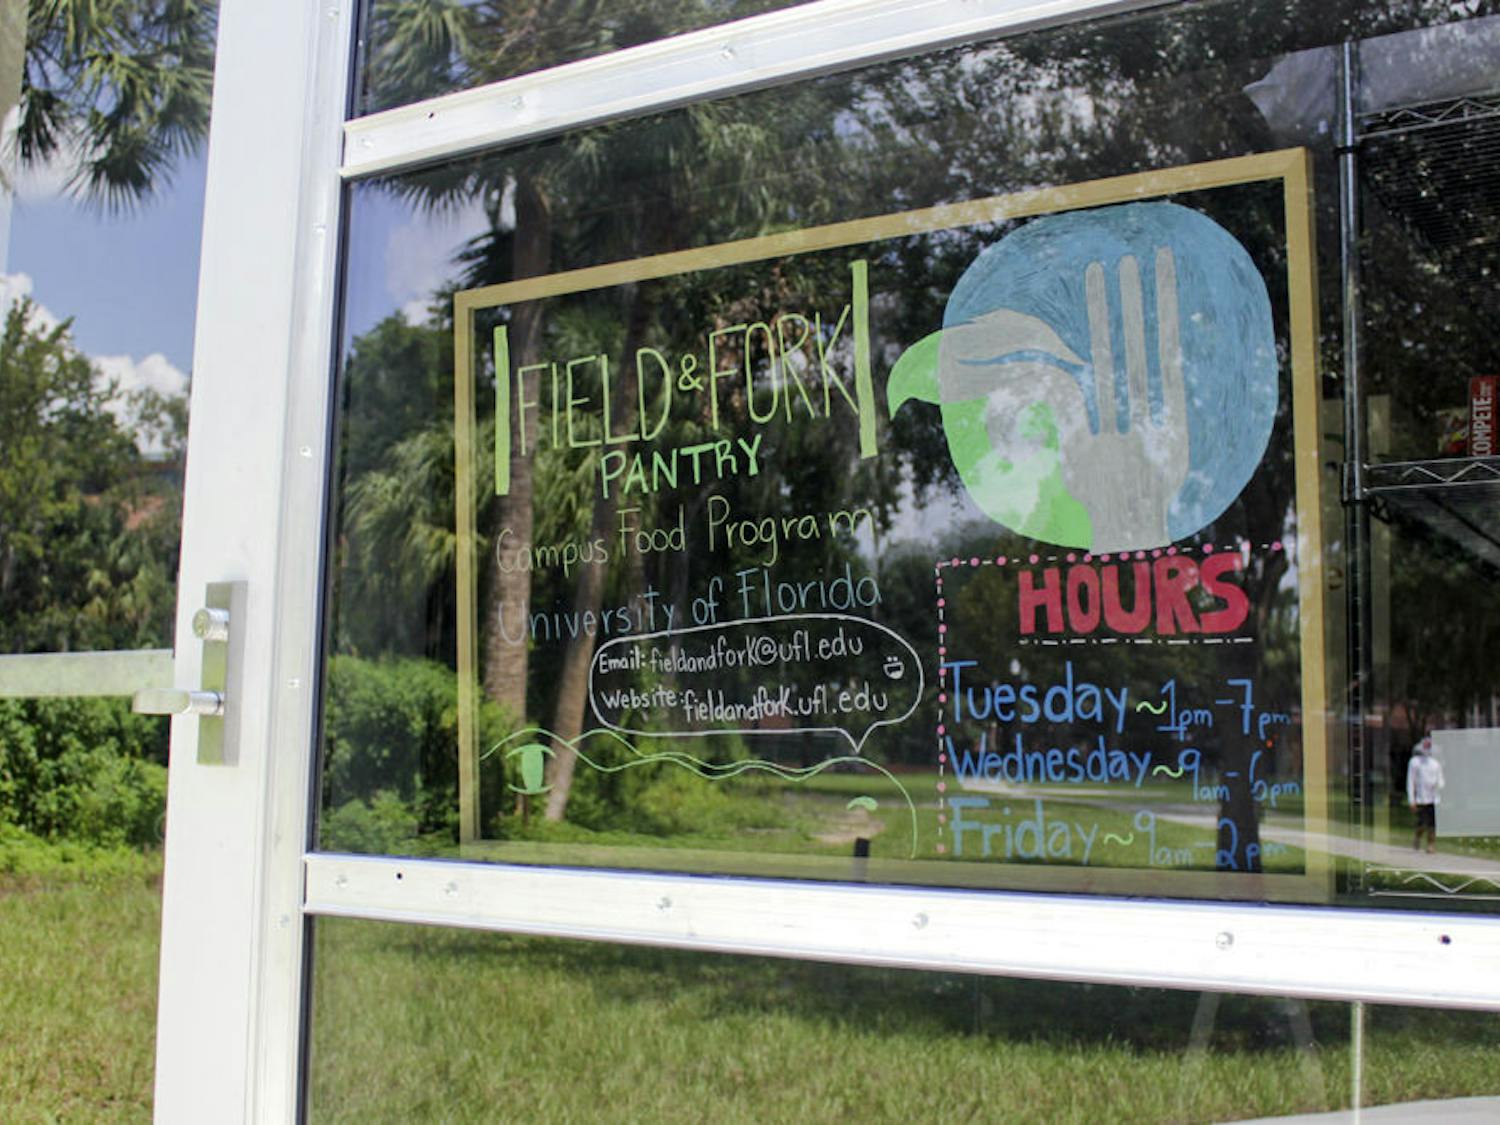 A sign in the window shows the hours of the Field and Fork Food Pantry on Sunday.